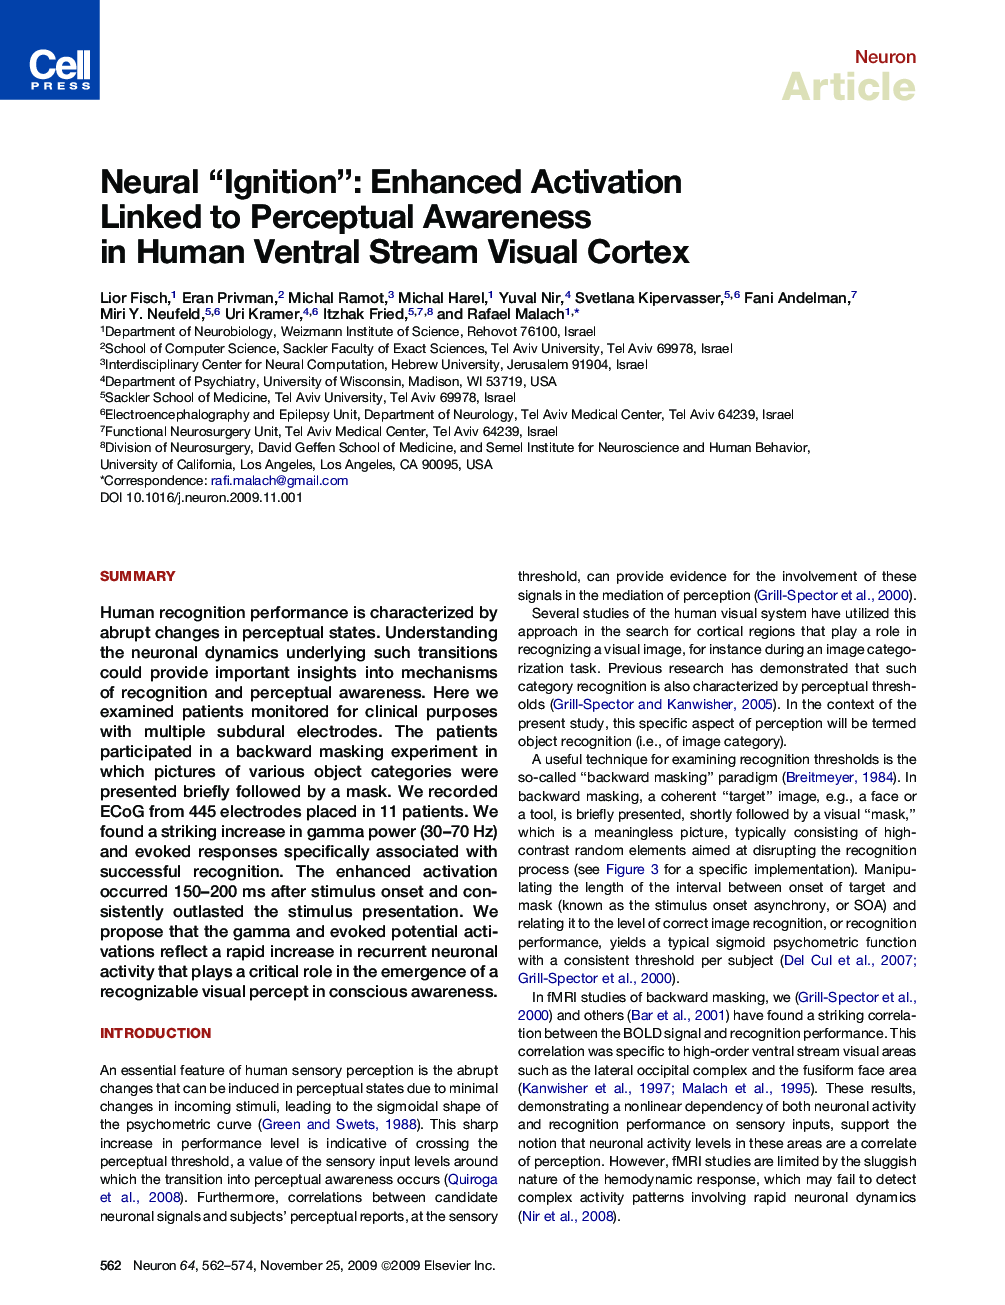 Neural “Ignition”: Enhanced Activation Linked to Perceptual Awareness in Human Ventral Stream Visual Cortex